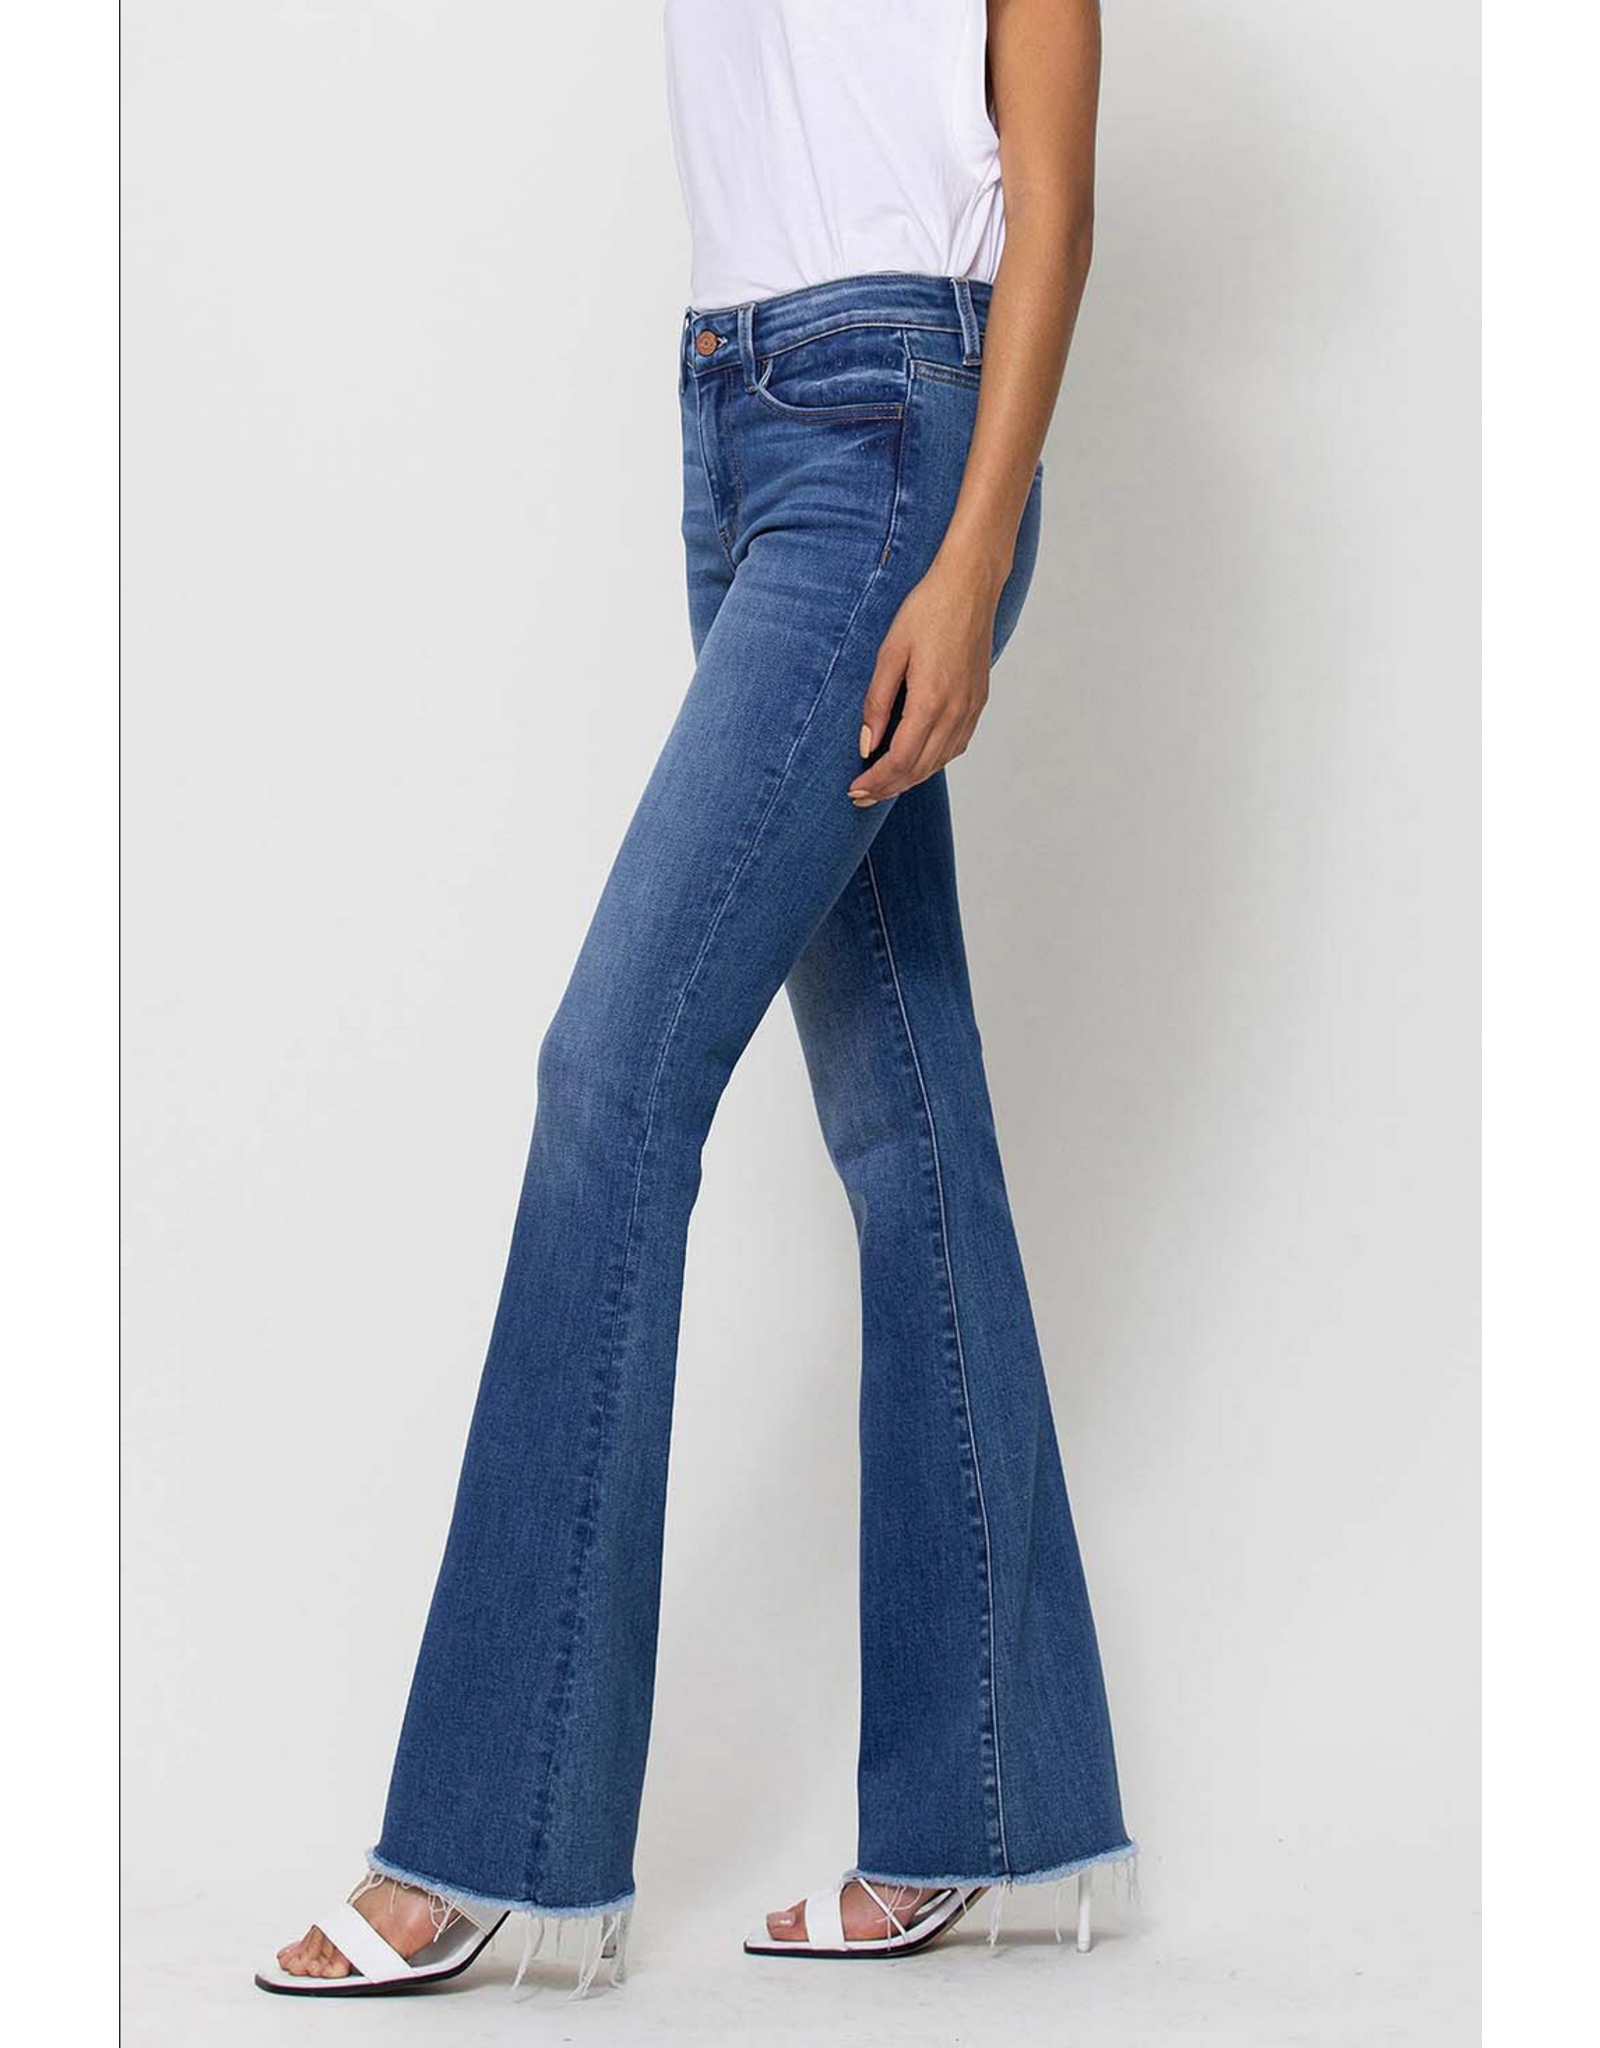 Mid Rise Mini Flare with Raw Hem Jeans from Vervet by Flying